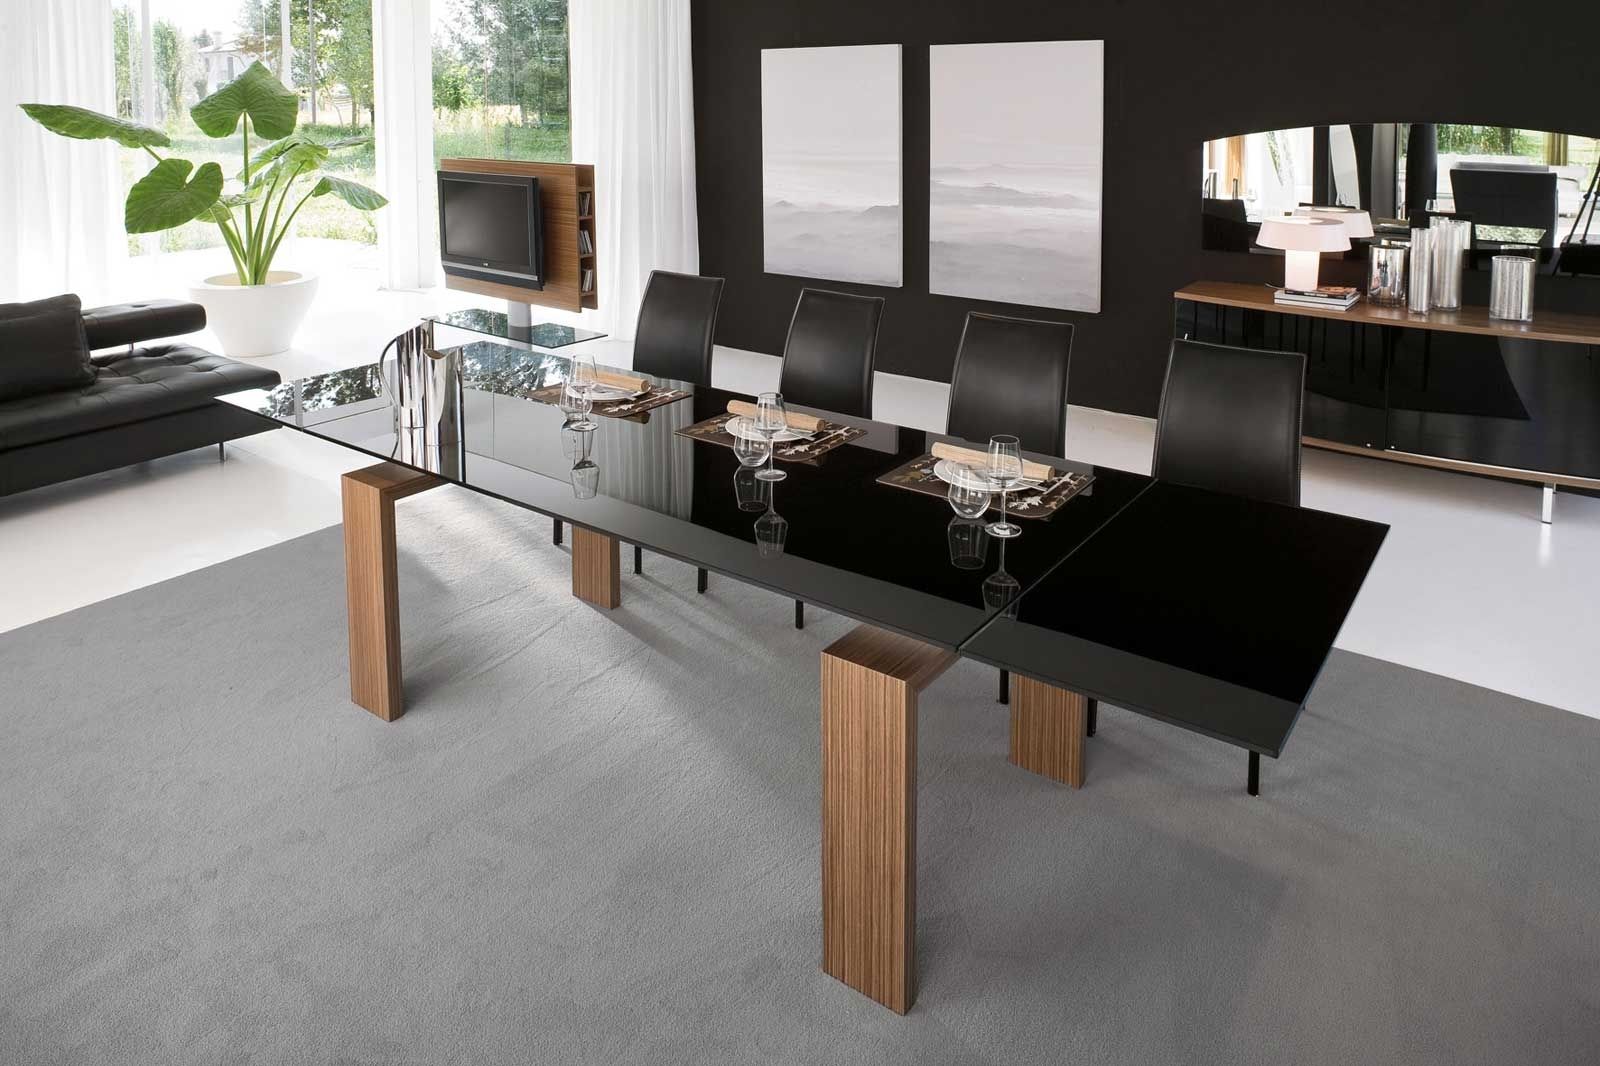 Best And Newest Dining Room Modern Kitchen Dining Tables And Chairs Unusual Dining Within Unusual Dining Tables For Sale (View 5 of 25)